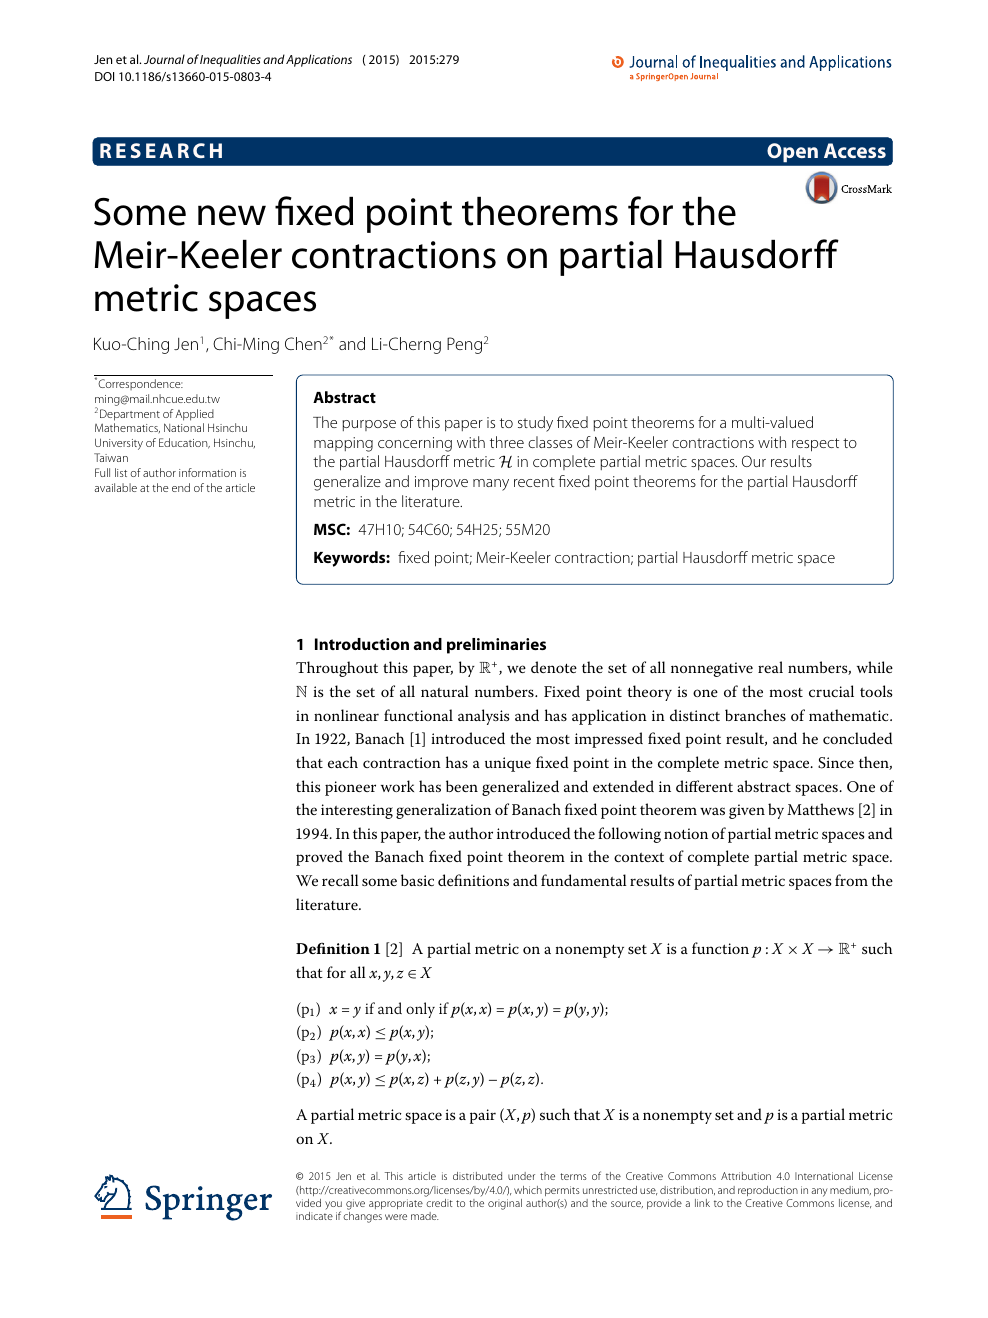 Some New Fixed Point Theorems For The Meir Keeler Contractions On Partial Hausdorff Metric Spaces Topic Of Research Paper In Mathematics Download Scholarly Article Pdf And Read For Free On Cyberleninka Open